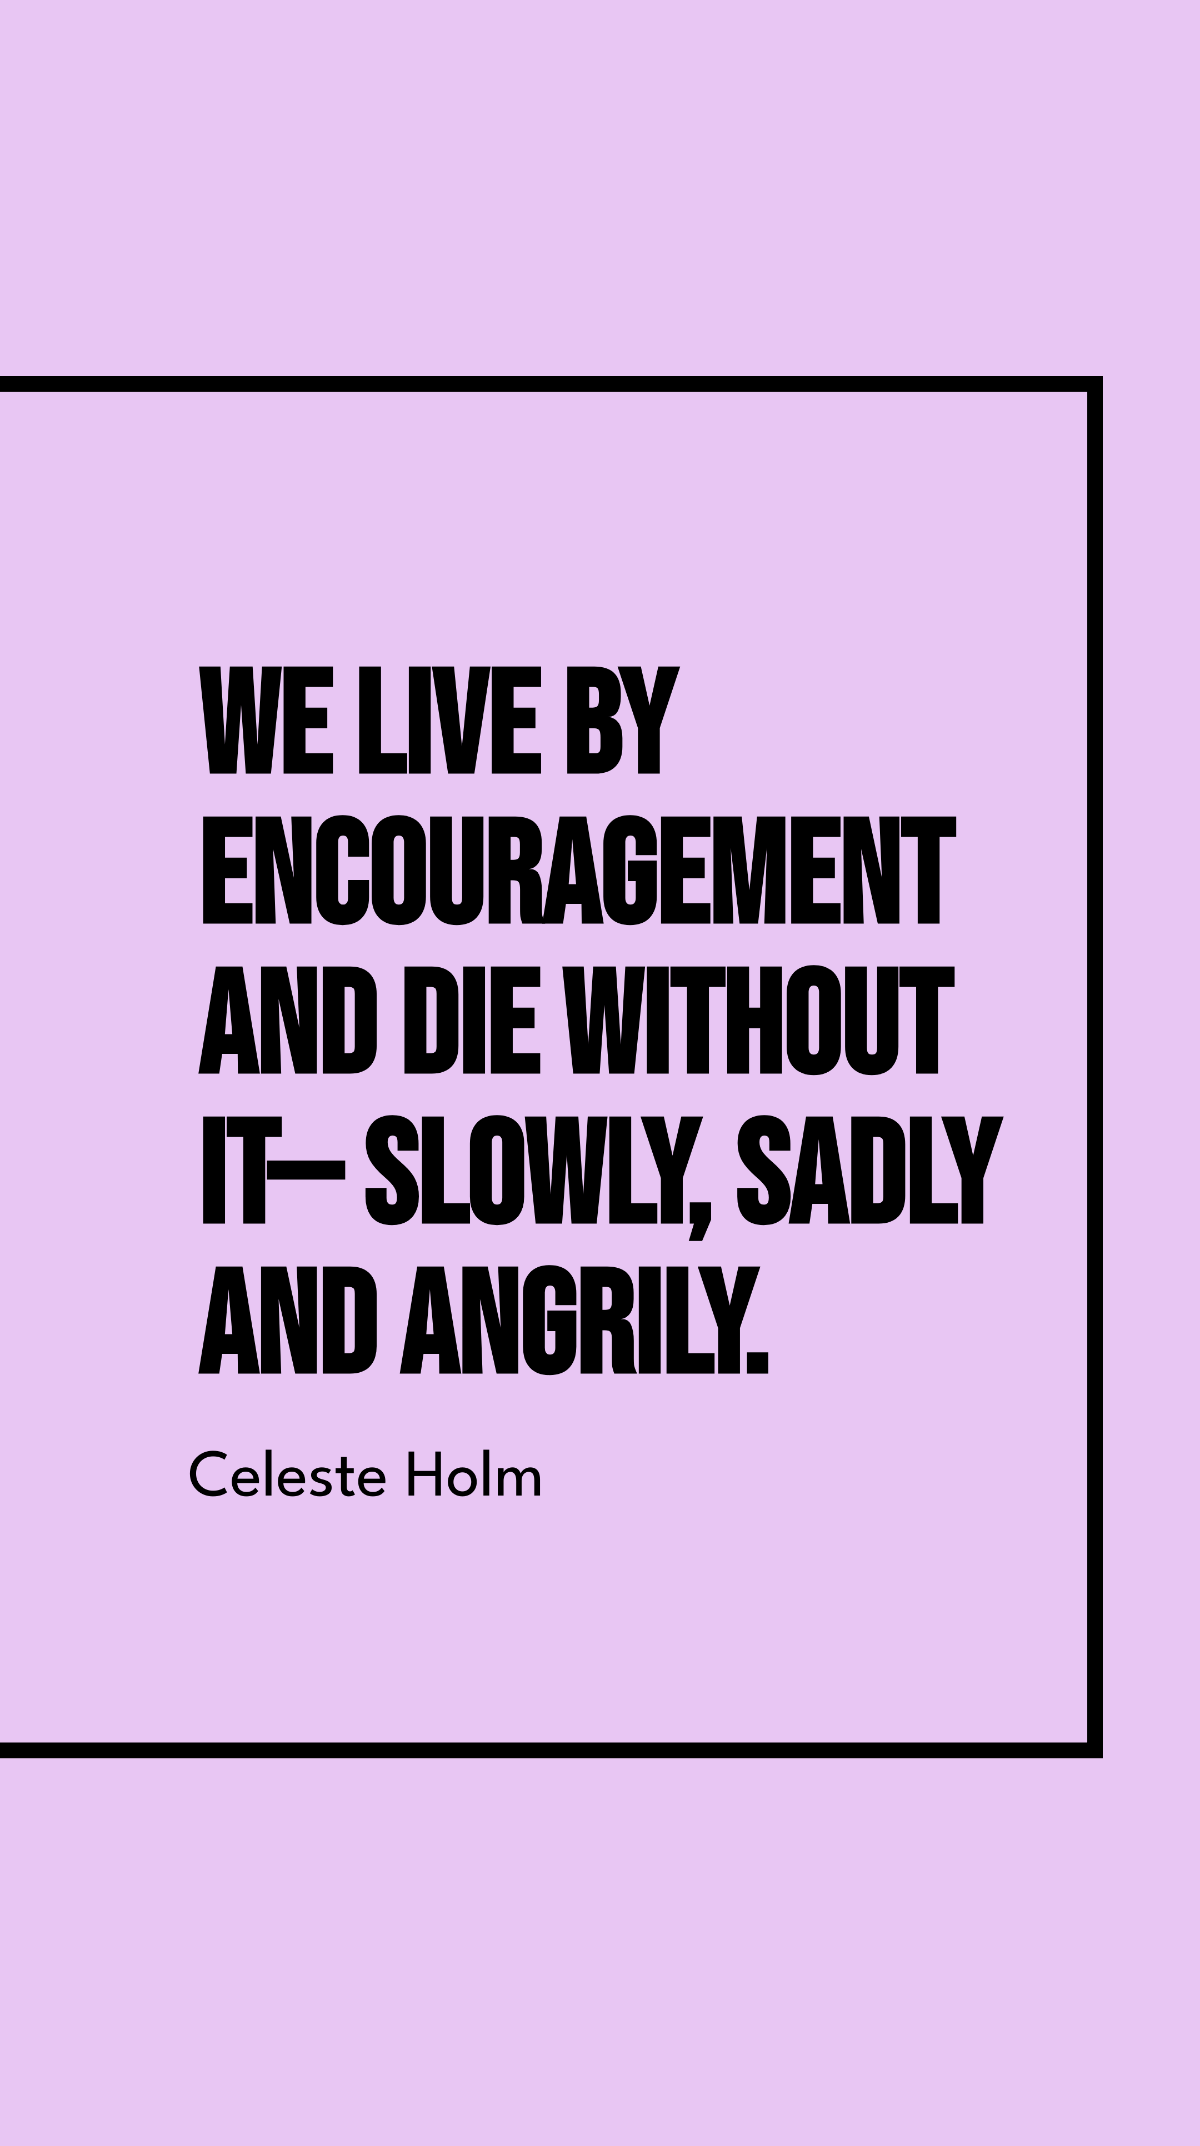 Celeste Holm - We live by encouragement and die without it - slowly, sadly and angrily.